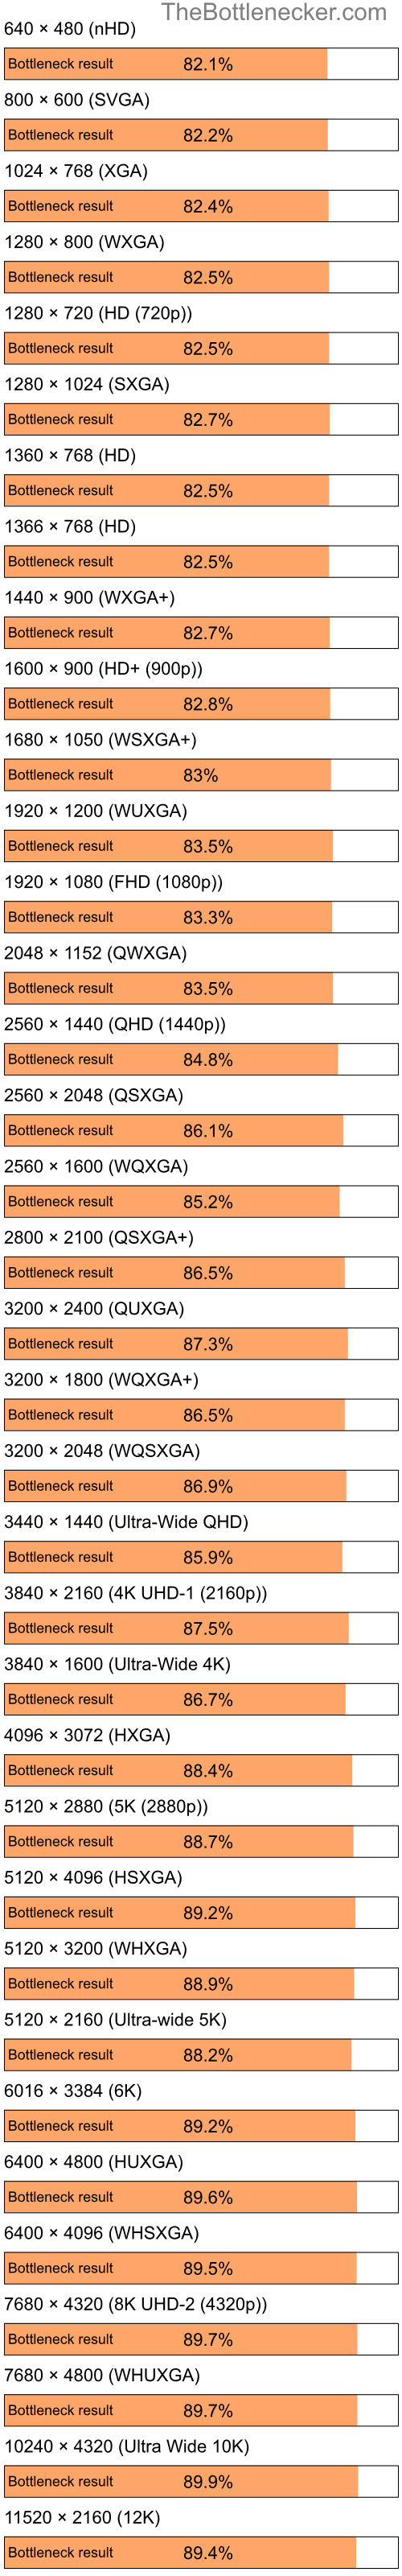 Bottleneck results by resolution for Intel Pentium 4 and NVIDIA GeForce 6150SE nForce 430 in Graphic Card Intense Tasks